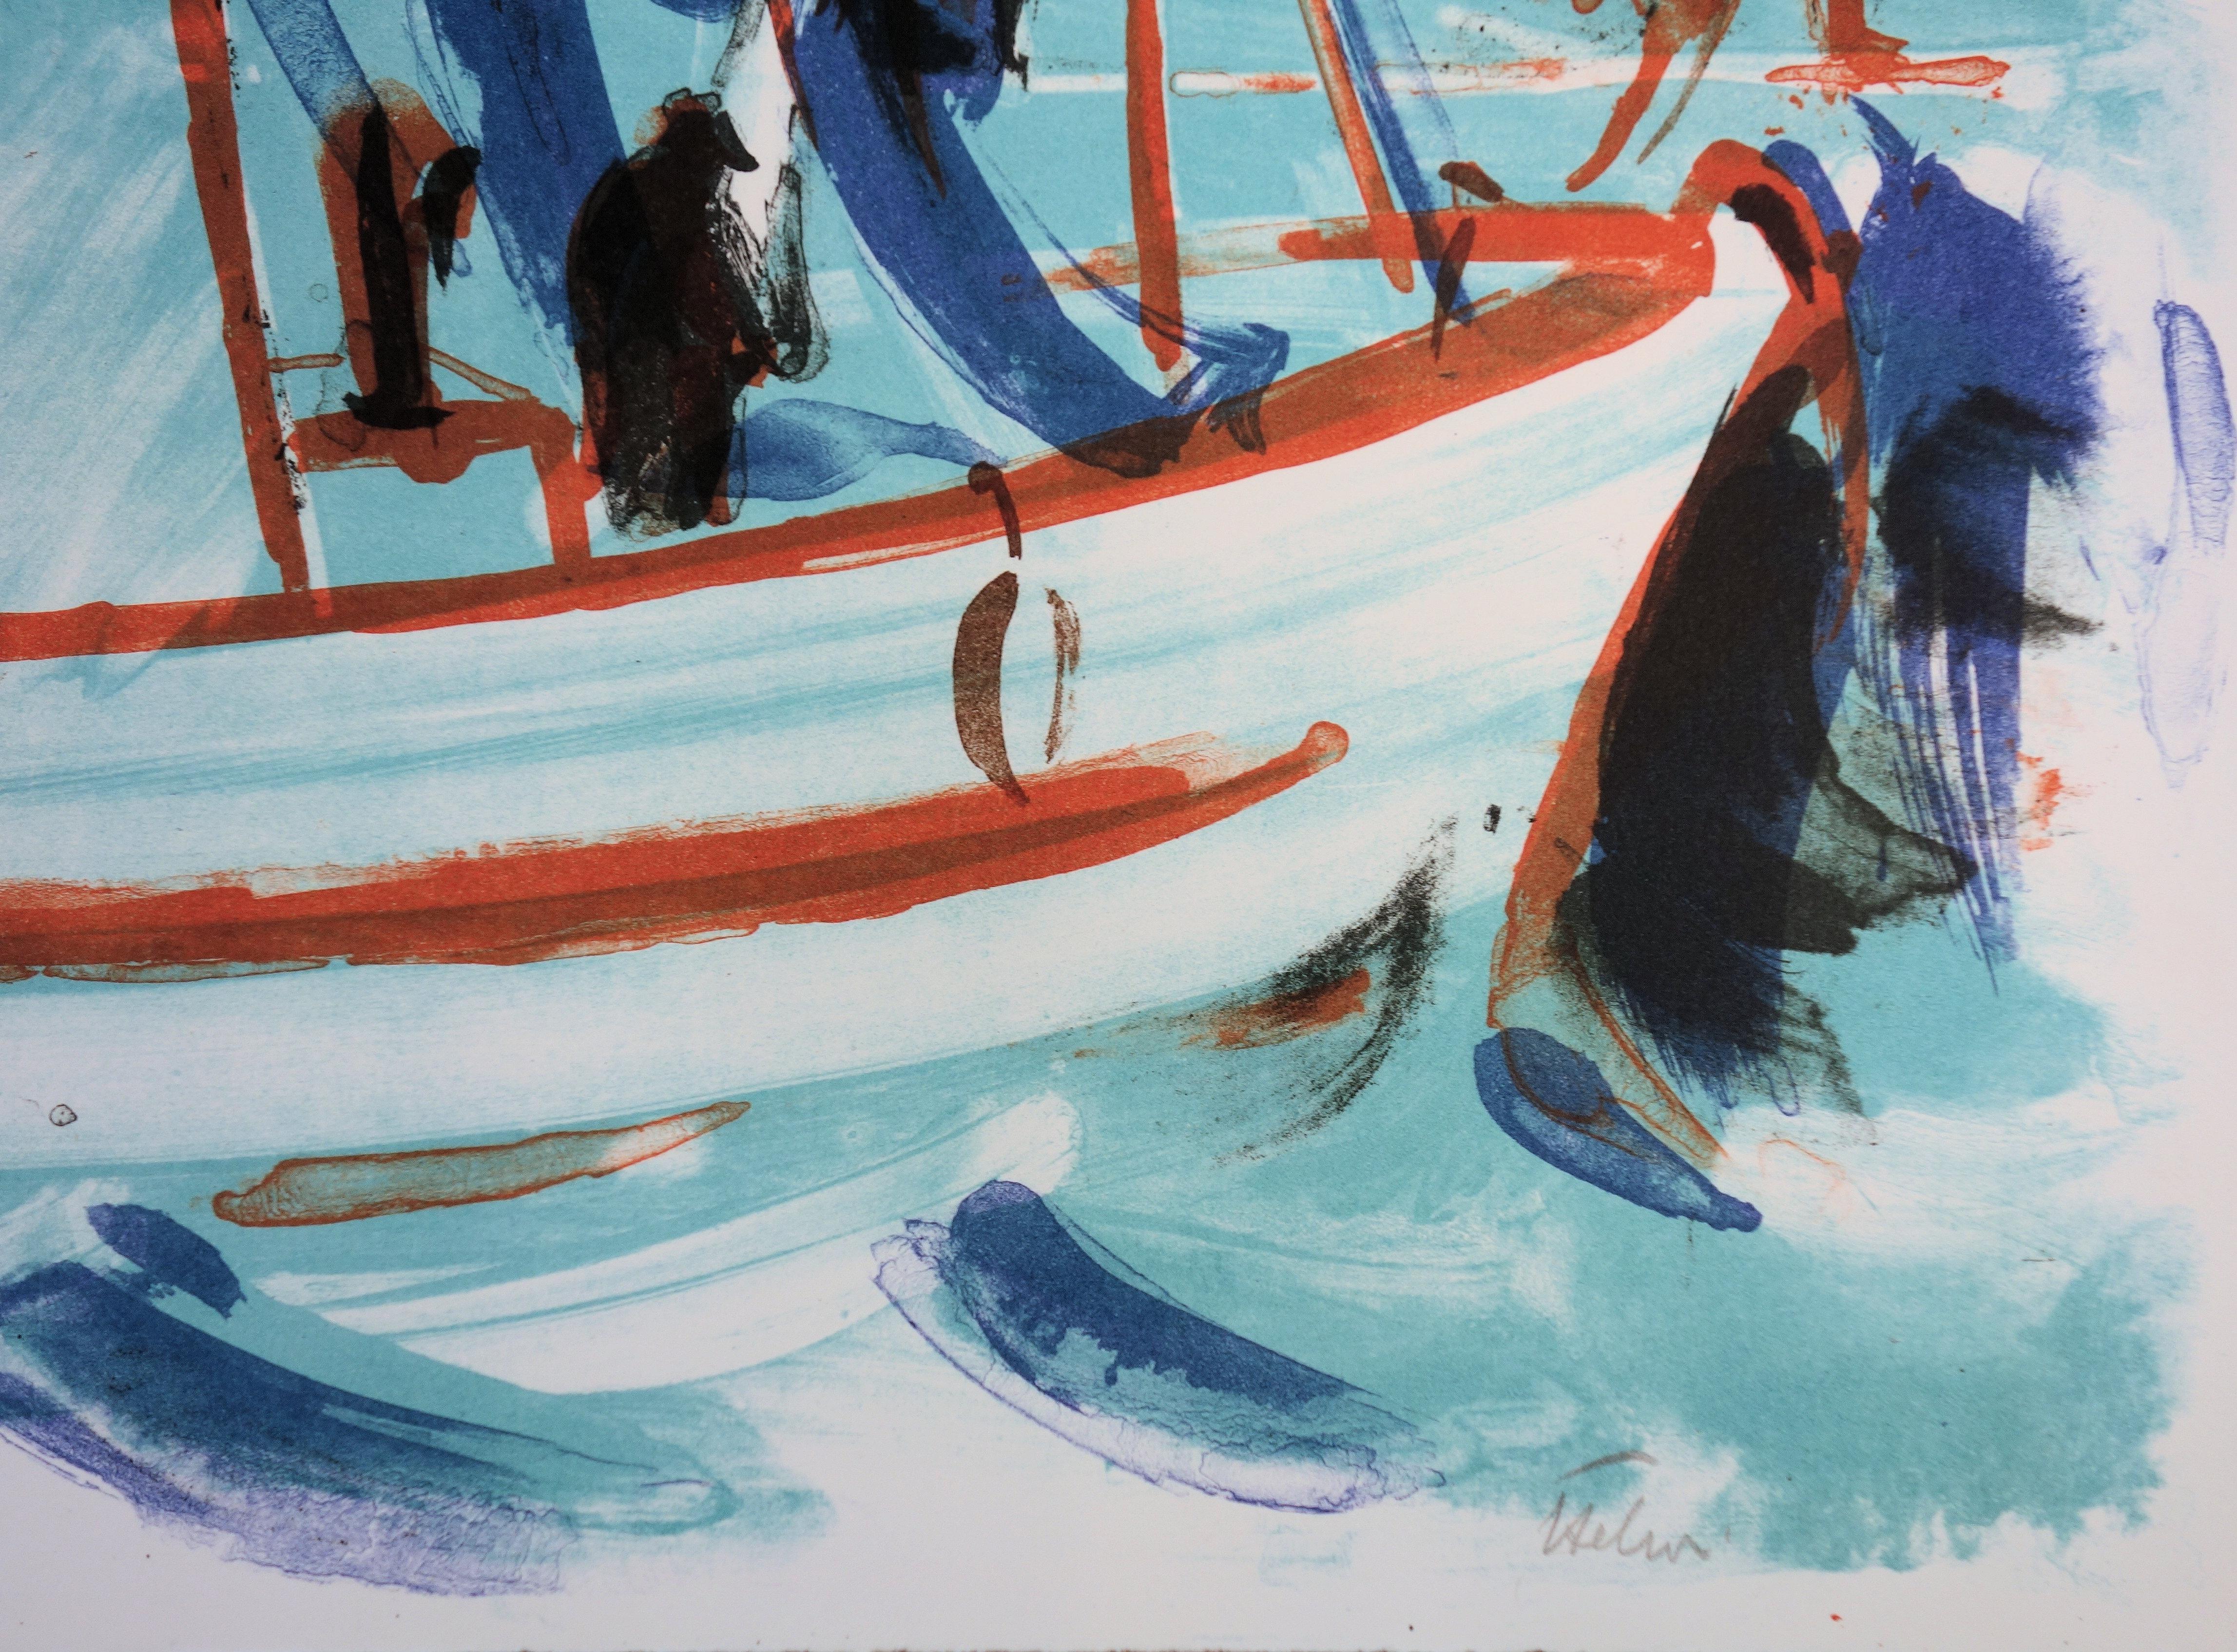 Fishermen working on a Boat - Original handsigned lithograph - 50 copies - Print by Jean Helion